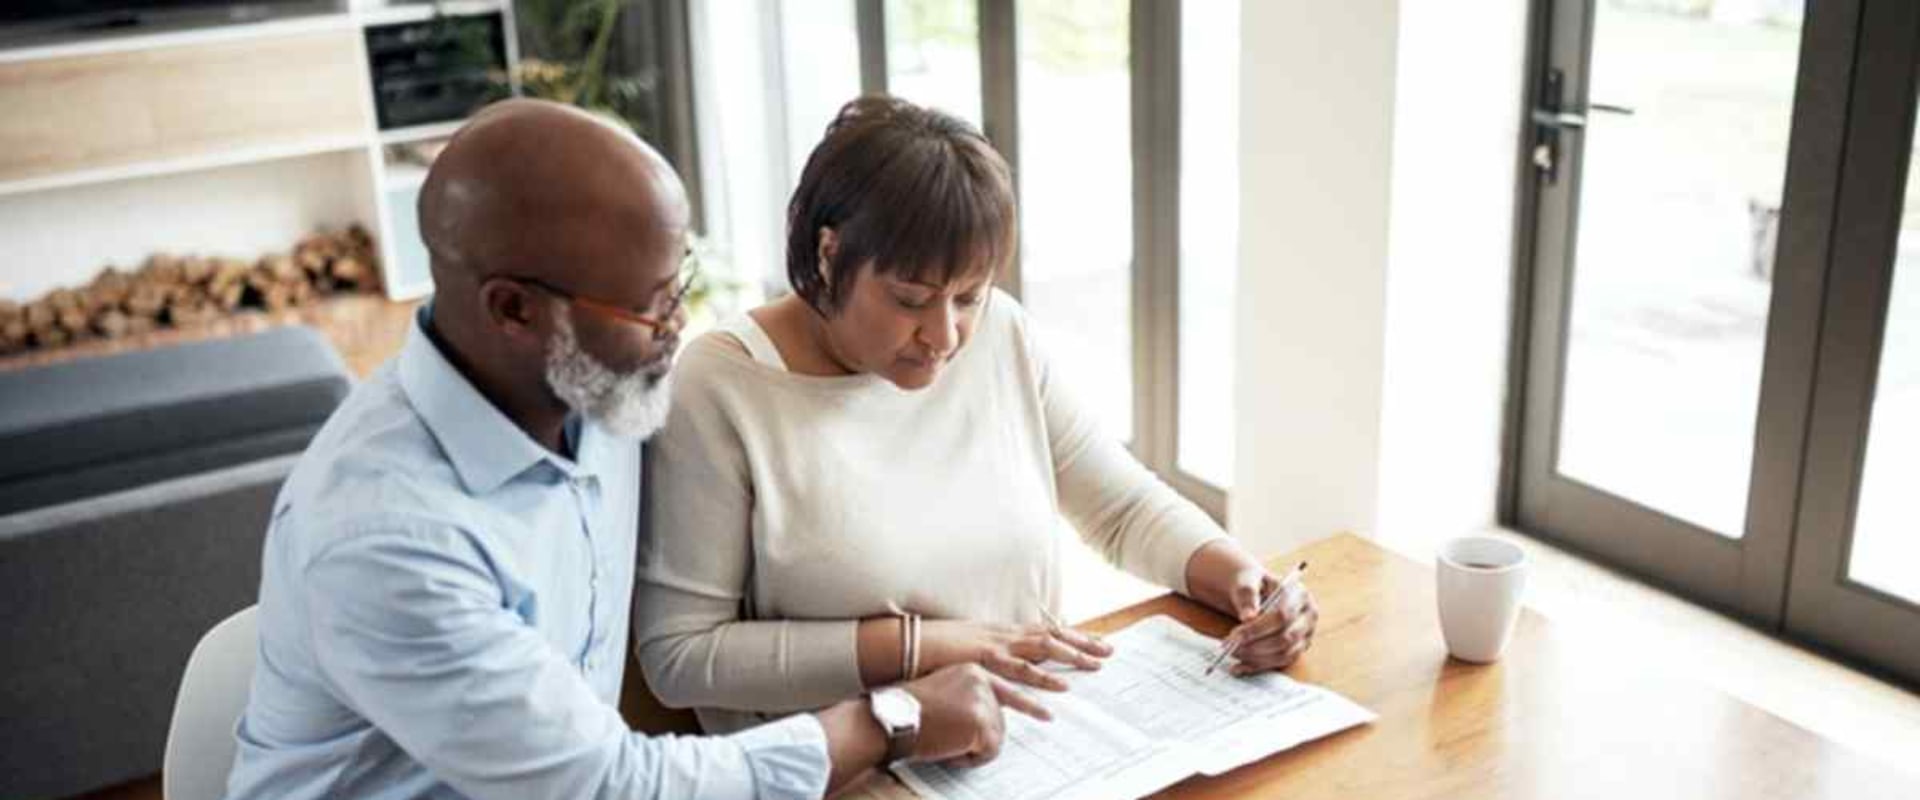 What are the benefits of retirement planning?